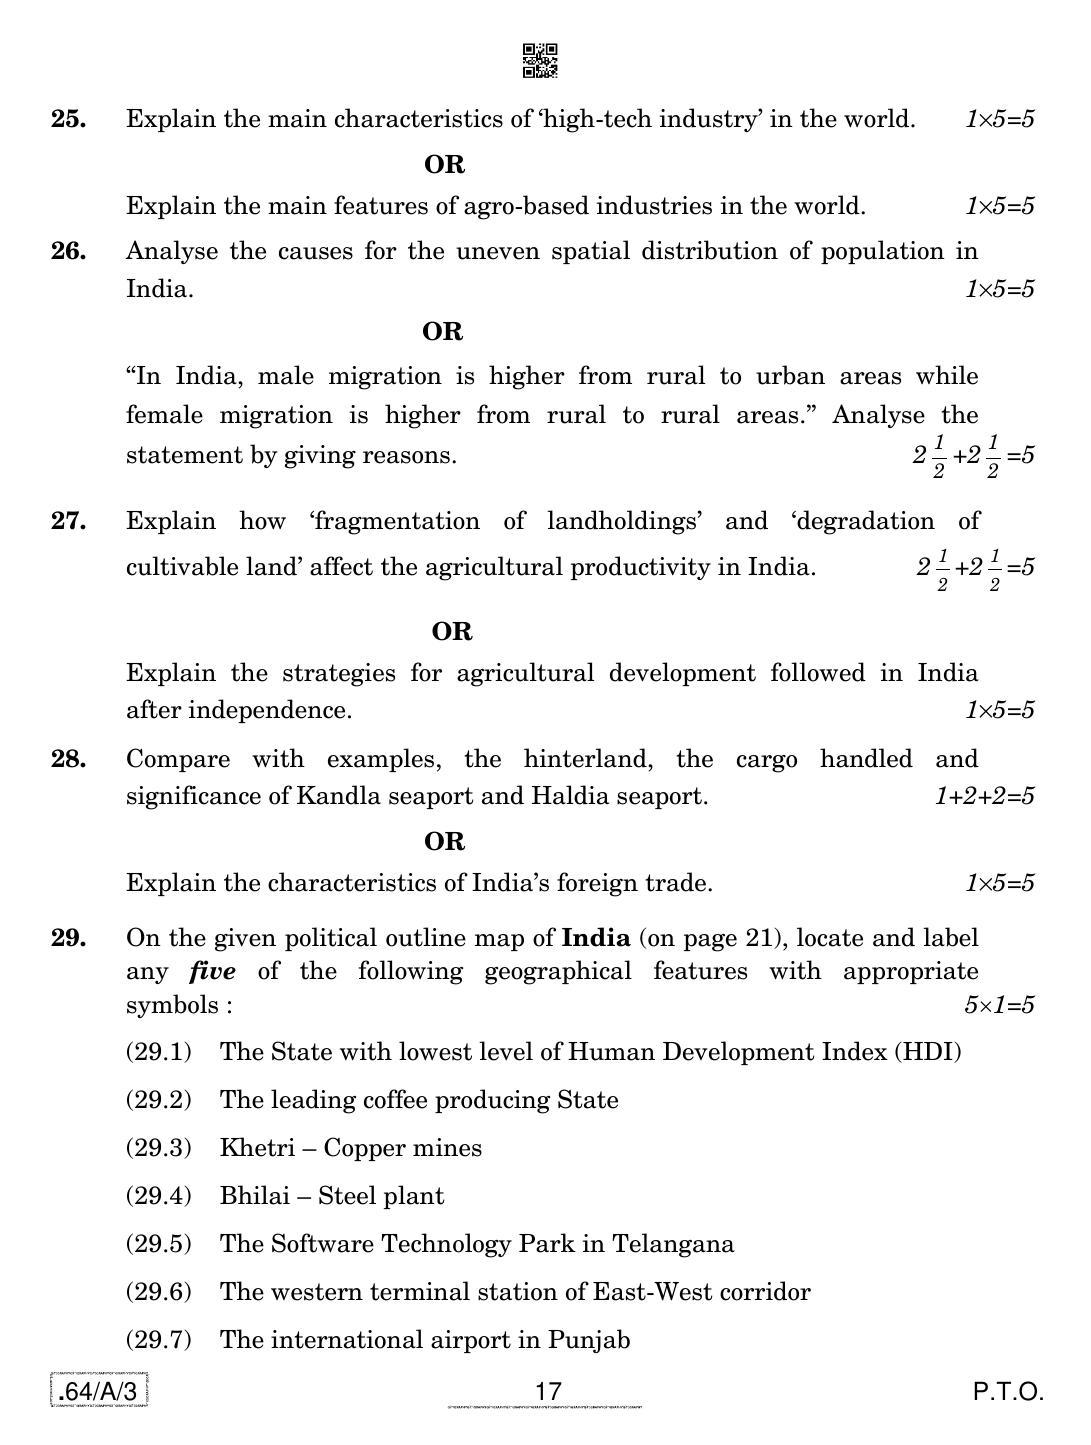 CBSE Class 12 64-C-3 - Geography 2020 Compartment Question Paper - Page 17